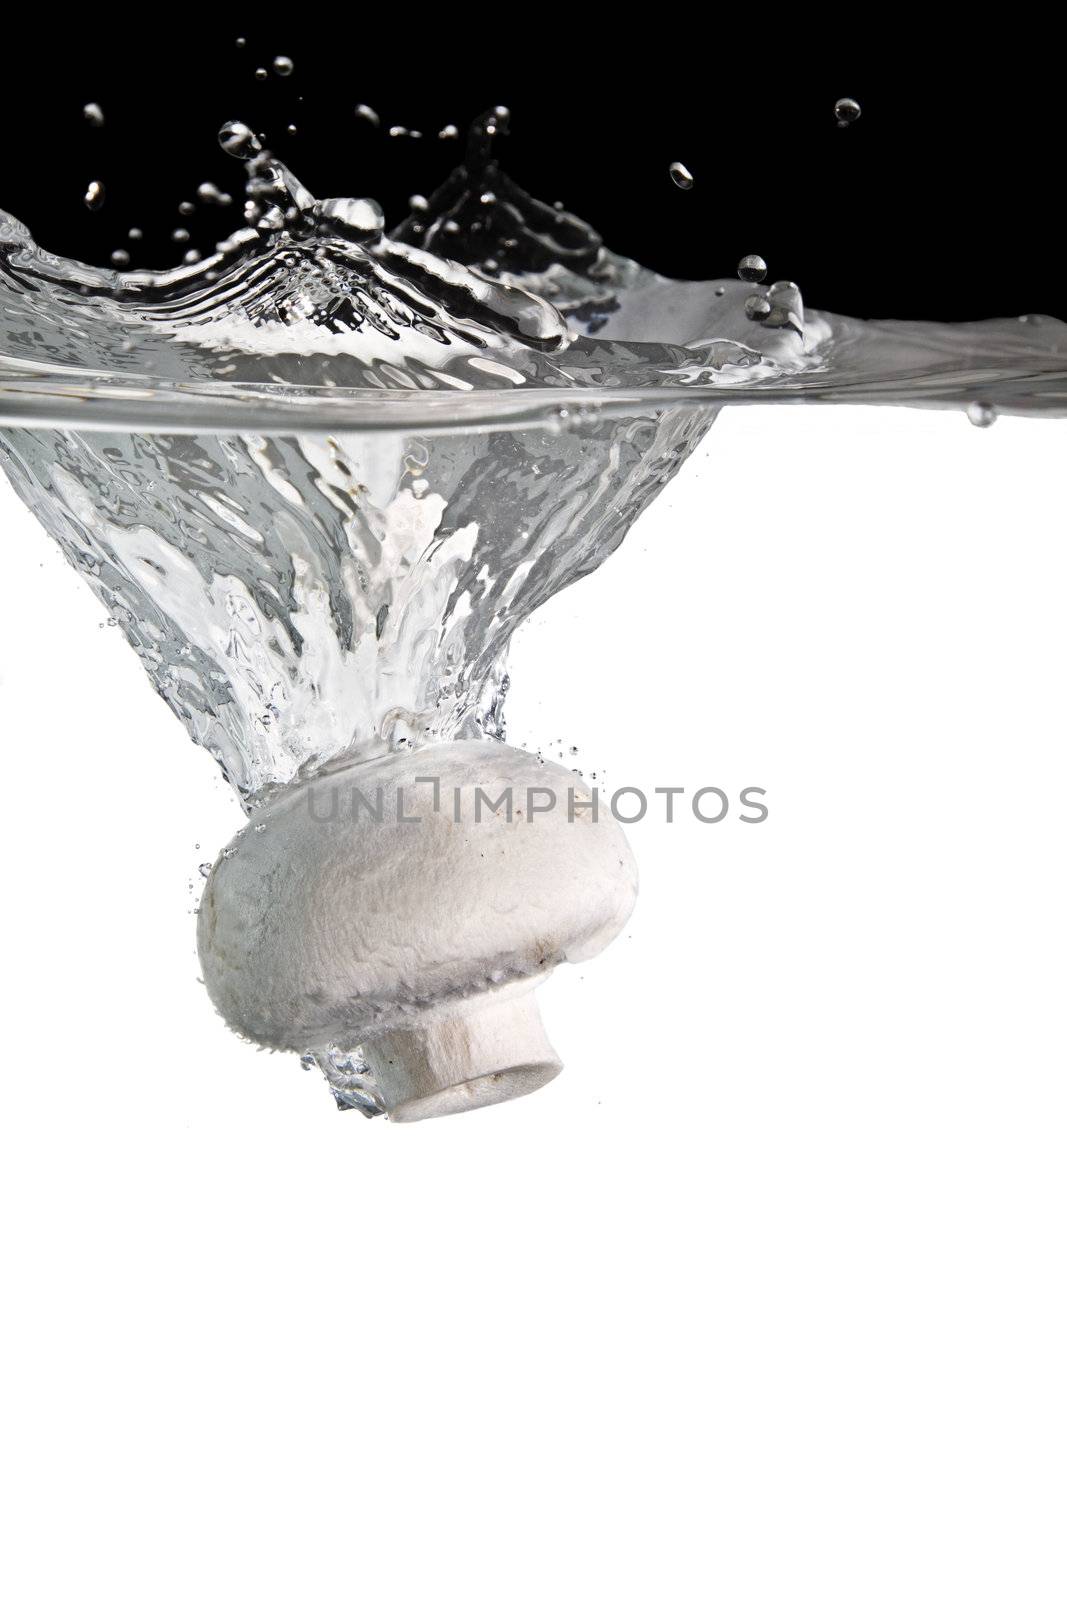 one mushroom thrown in water with black and white background